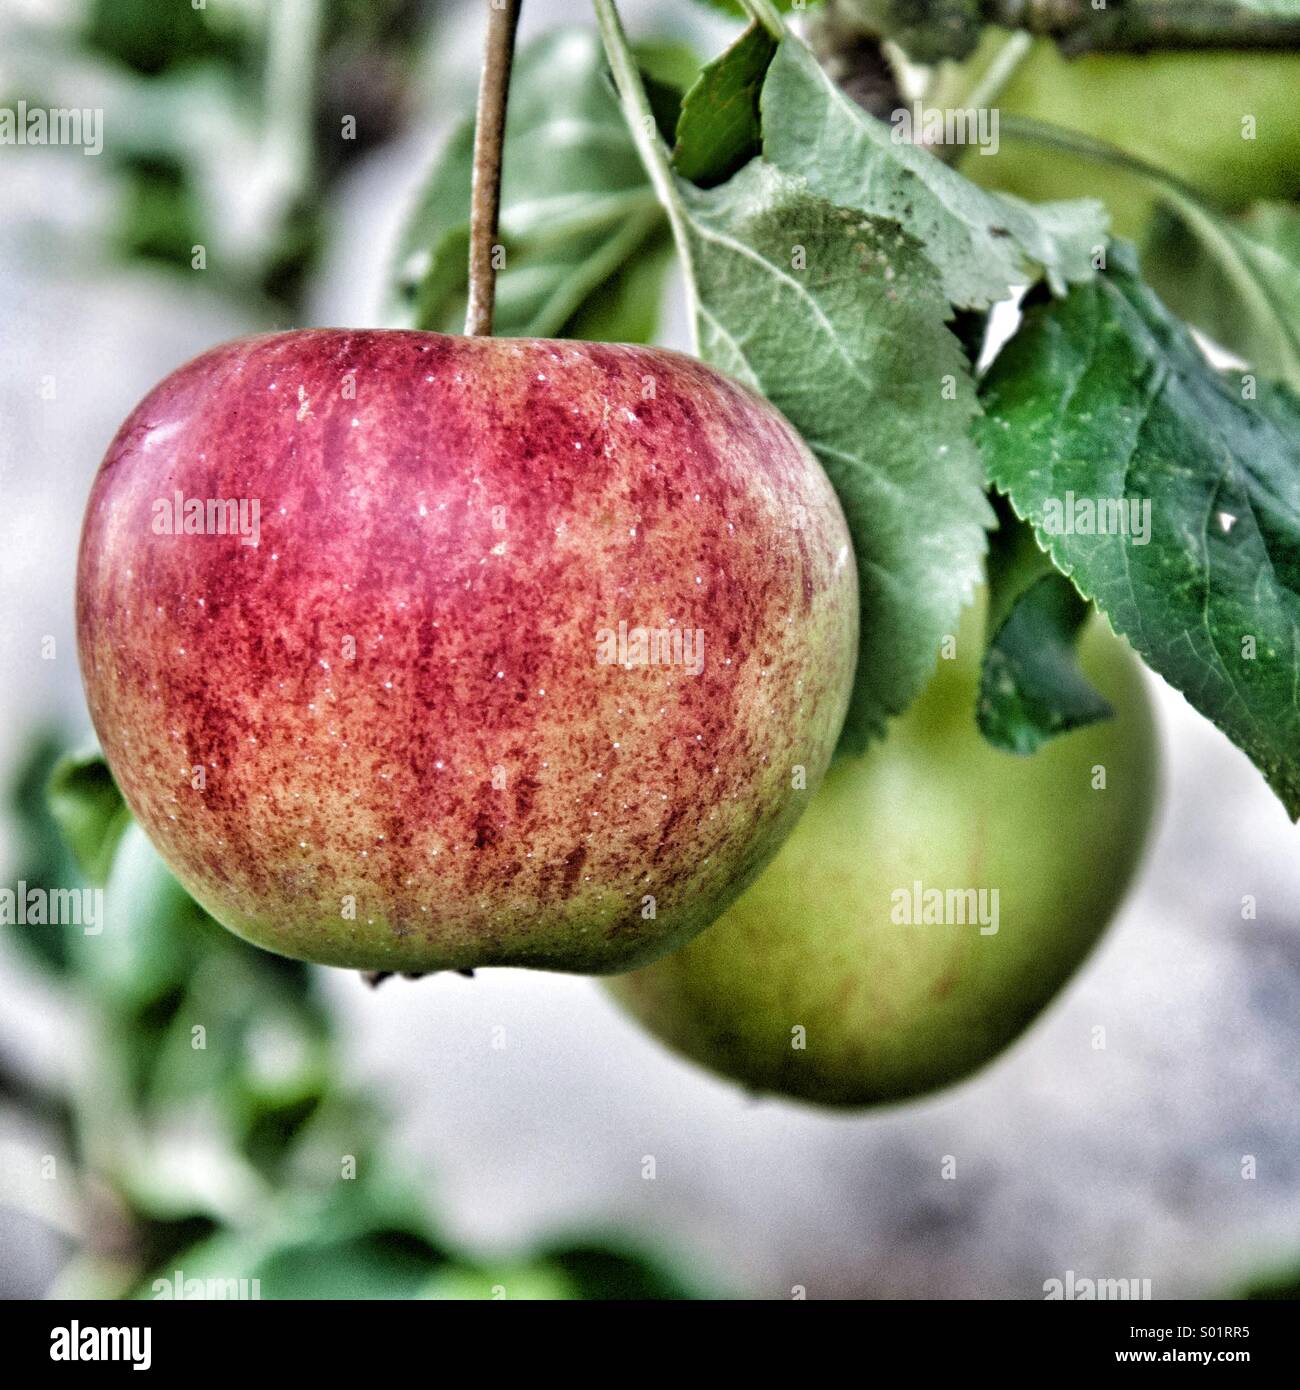 Ripe apples hanging on the tree Stock Photo